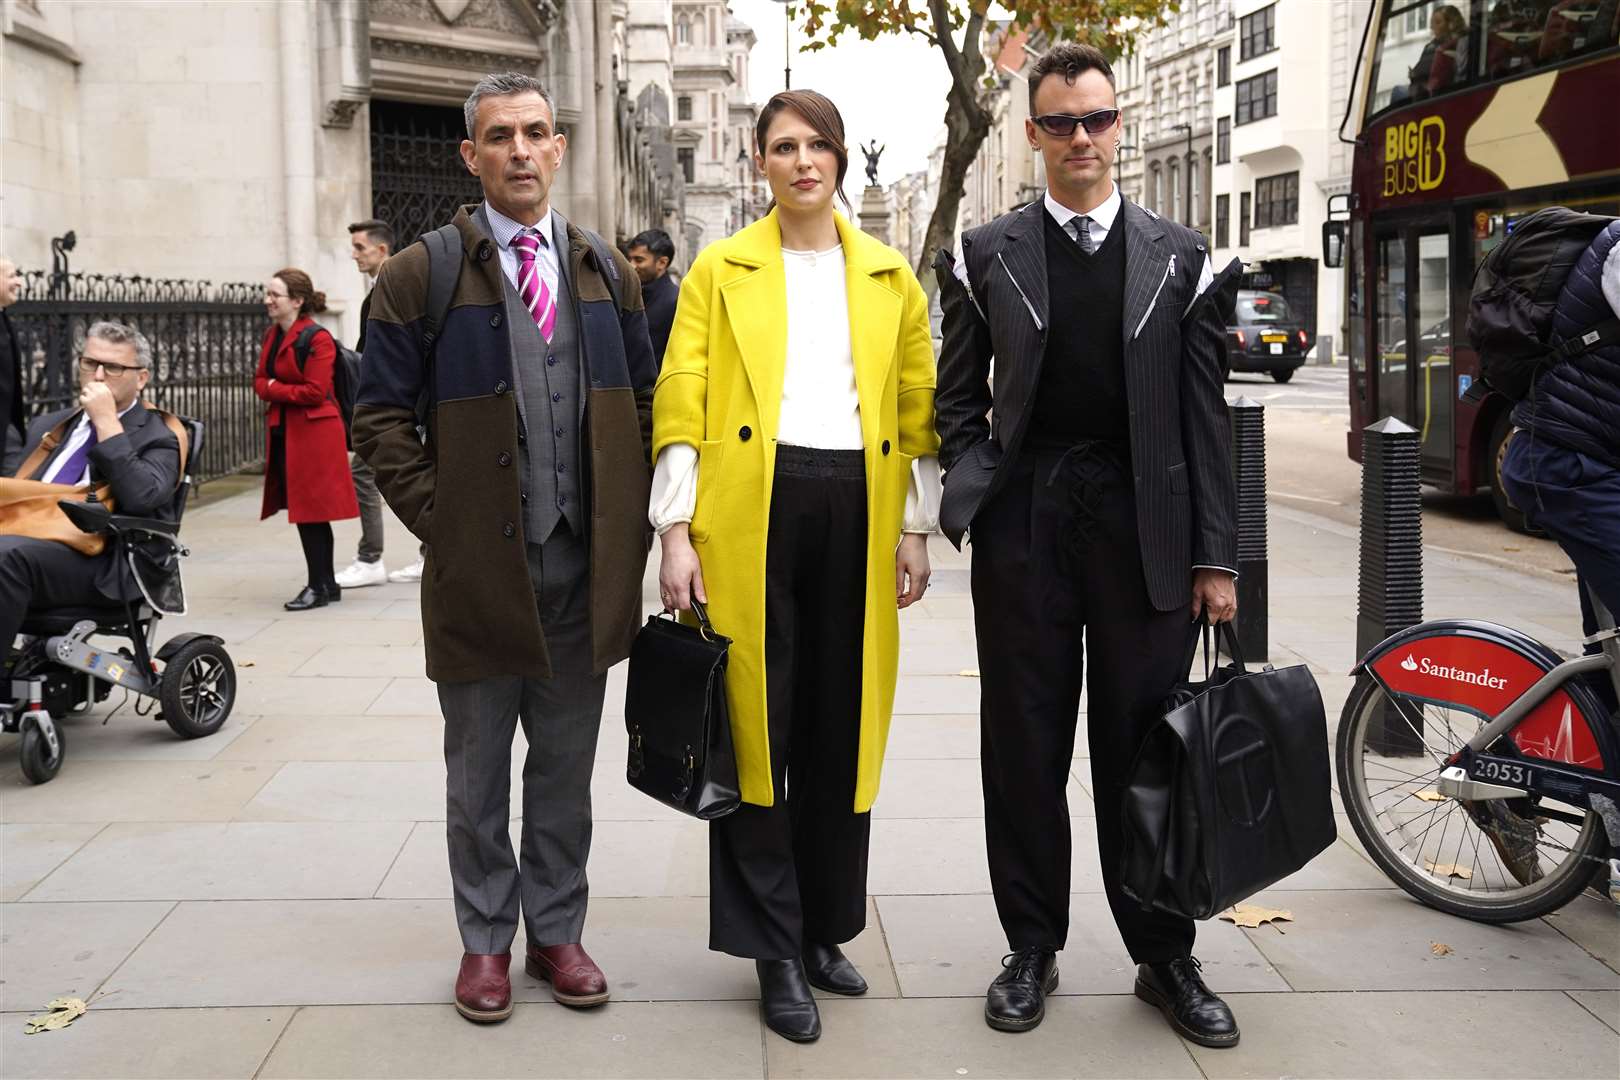 Simon Blake, Nicola Thorp and Colin Seymour attended the trial in November 2023 in London (Lucy North/PA)